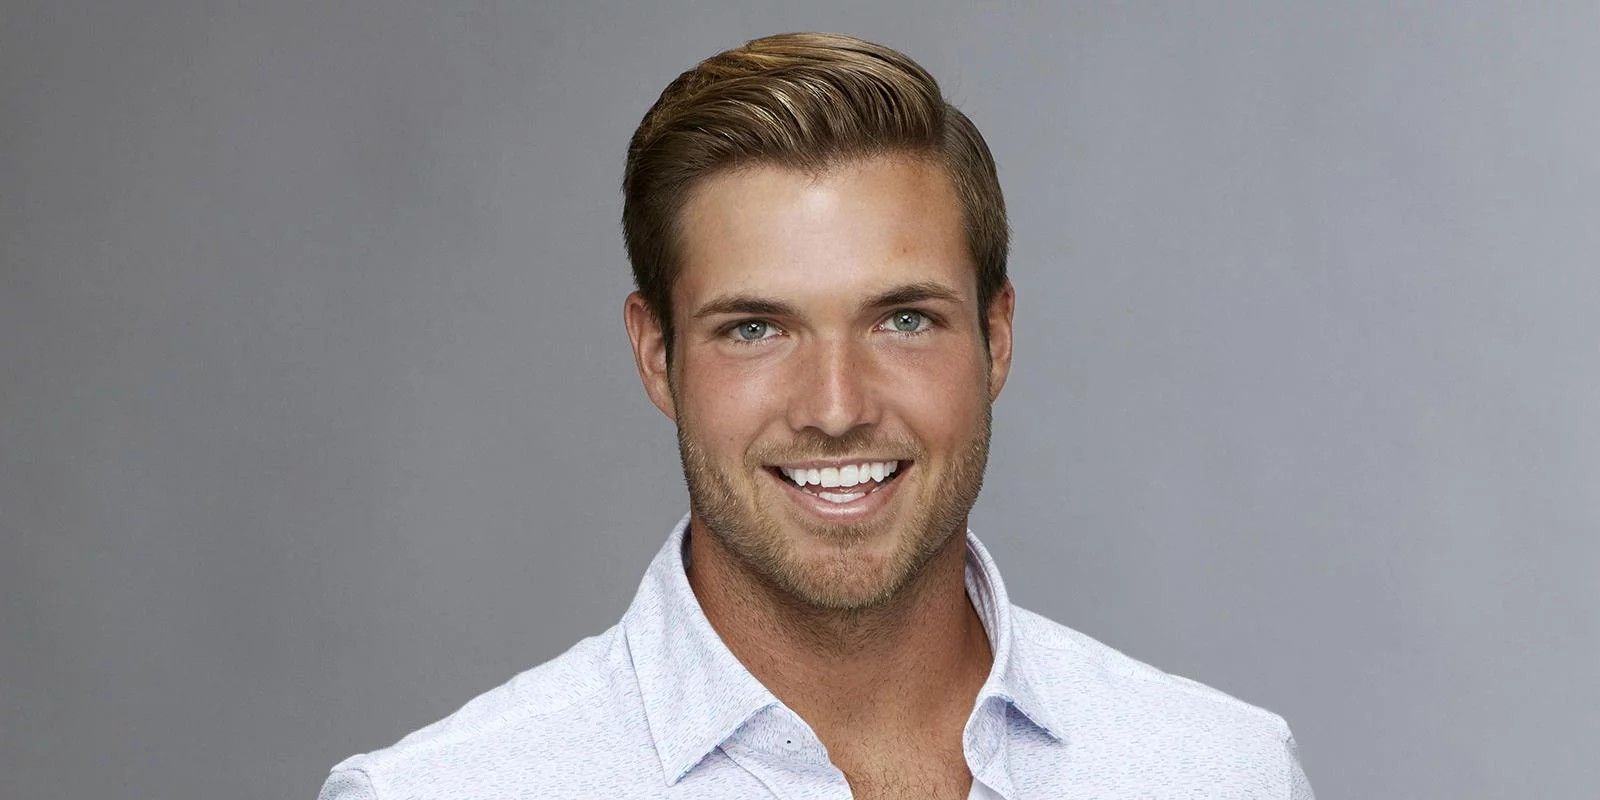 Jordan Kimball smiling for a promotional photo for The Bachelorette